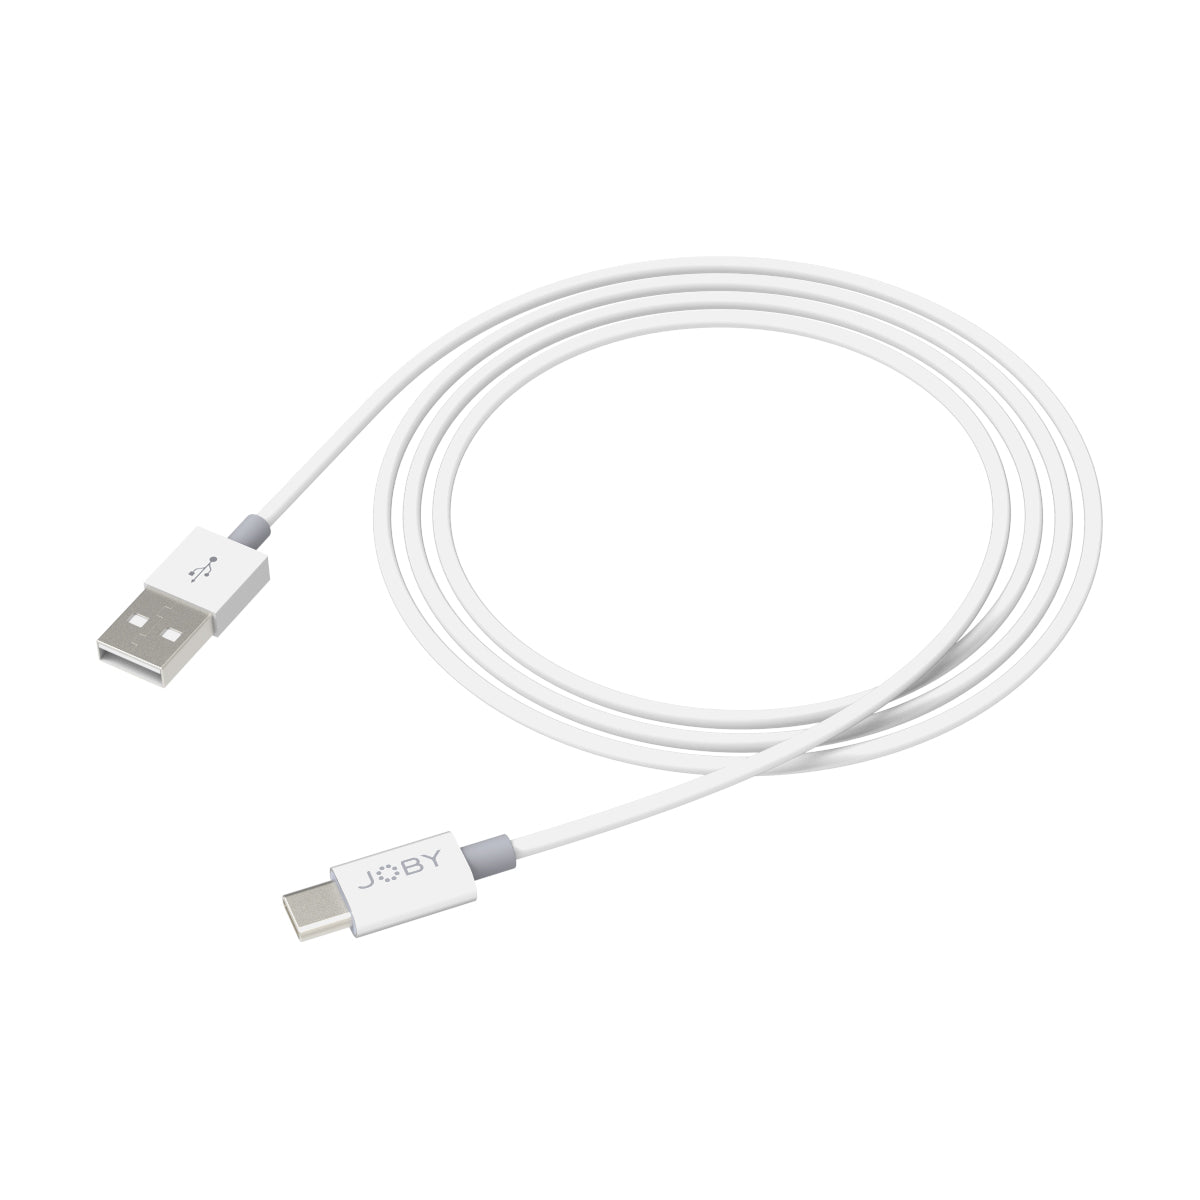 Joby Charge and Sync Cable USB-A to USB-C - 1.2m/4ft